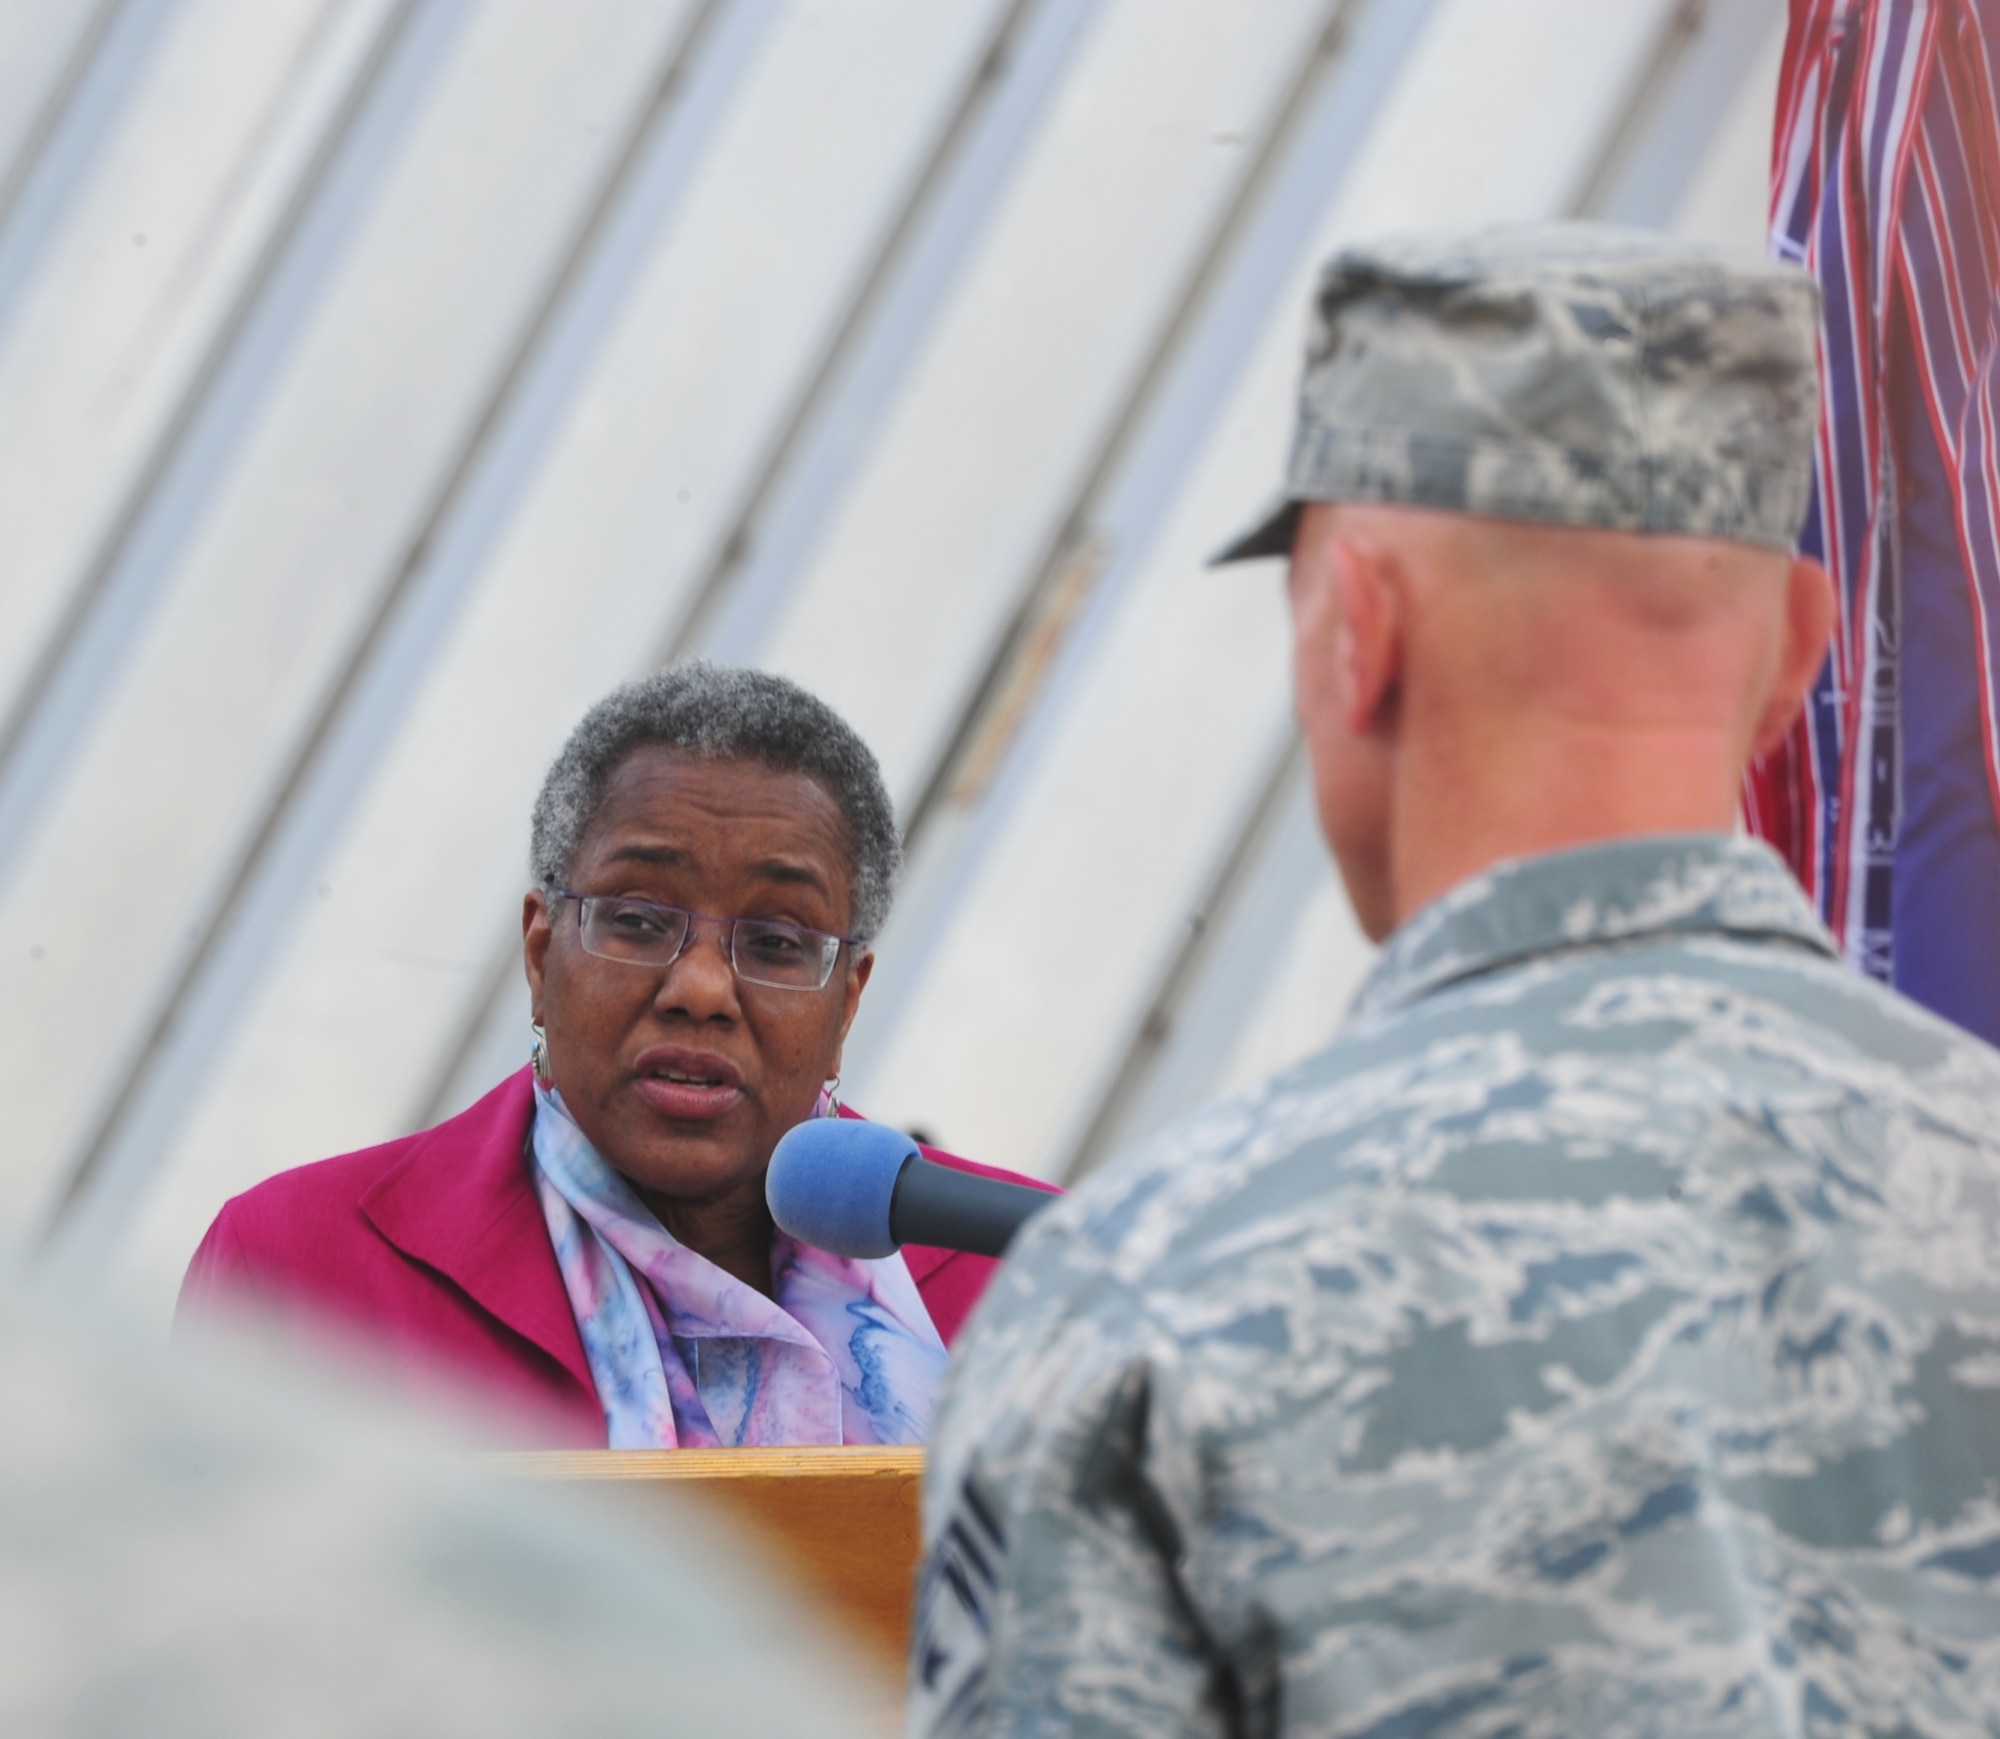 The Honorable Pamela Spratlen speaks during the 376th Air Expeditionary Wing's inactivation ceremony June 3, 2014, at the Transit Center at Manas, Kyrgyzstan. The ceremony involved comments from Col. John Millard, 376th AEW commander, as well as sheathing the squadron, group, and wing guidons. Spratlen is the U.S. ambassador to the Kyrgyz Republic. (U.S. Air Force photo/Lt. Col. Max Despain)